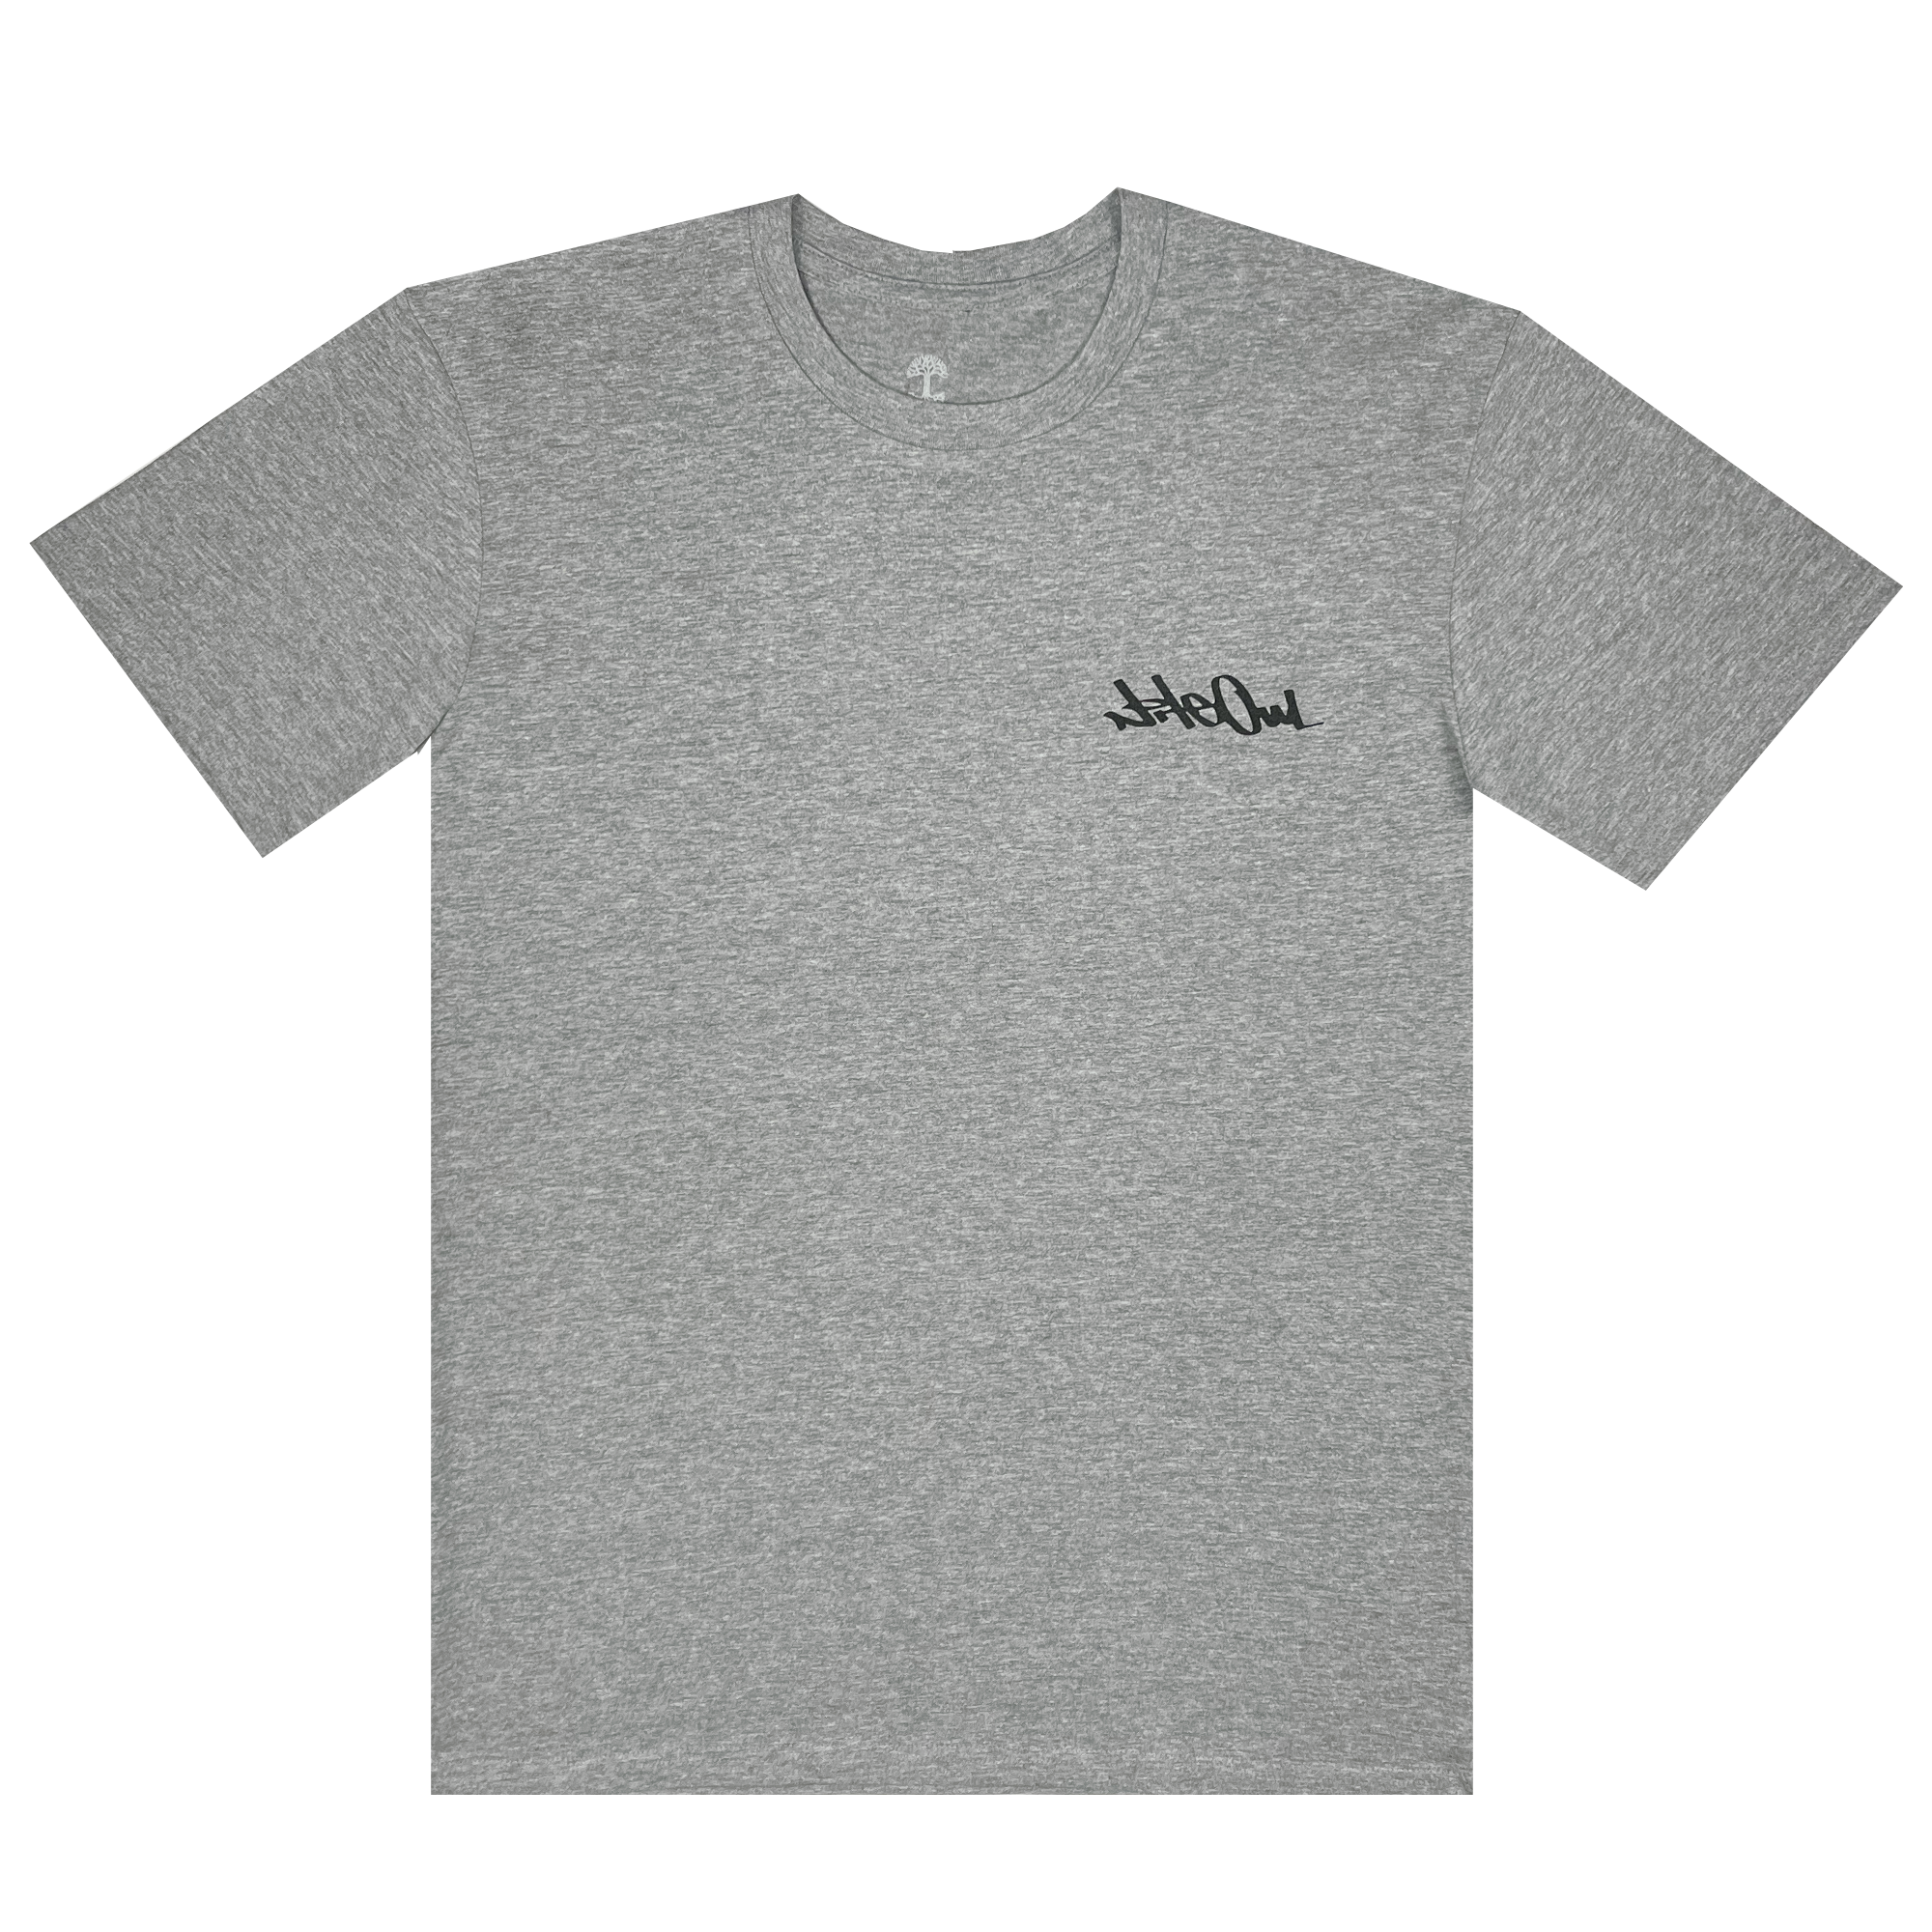 Frontside of a grey t-shirt with Oakland Artist Nite Owl logo/signature on left chest in white ink.